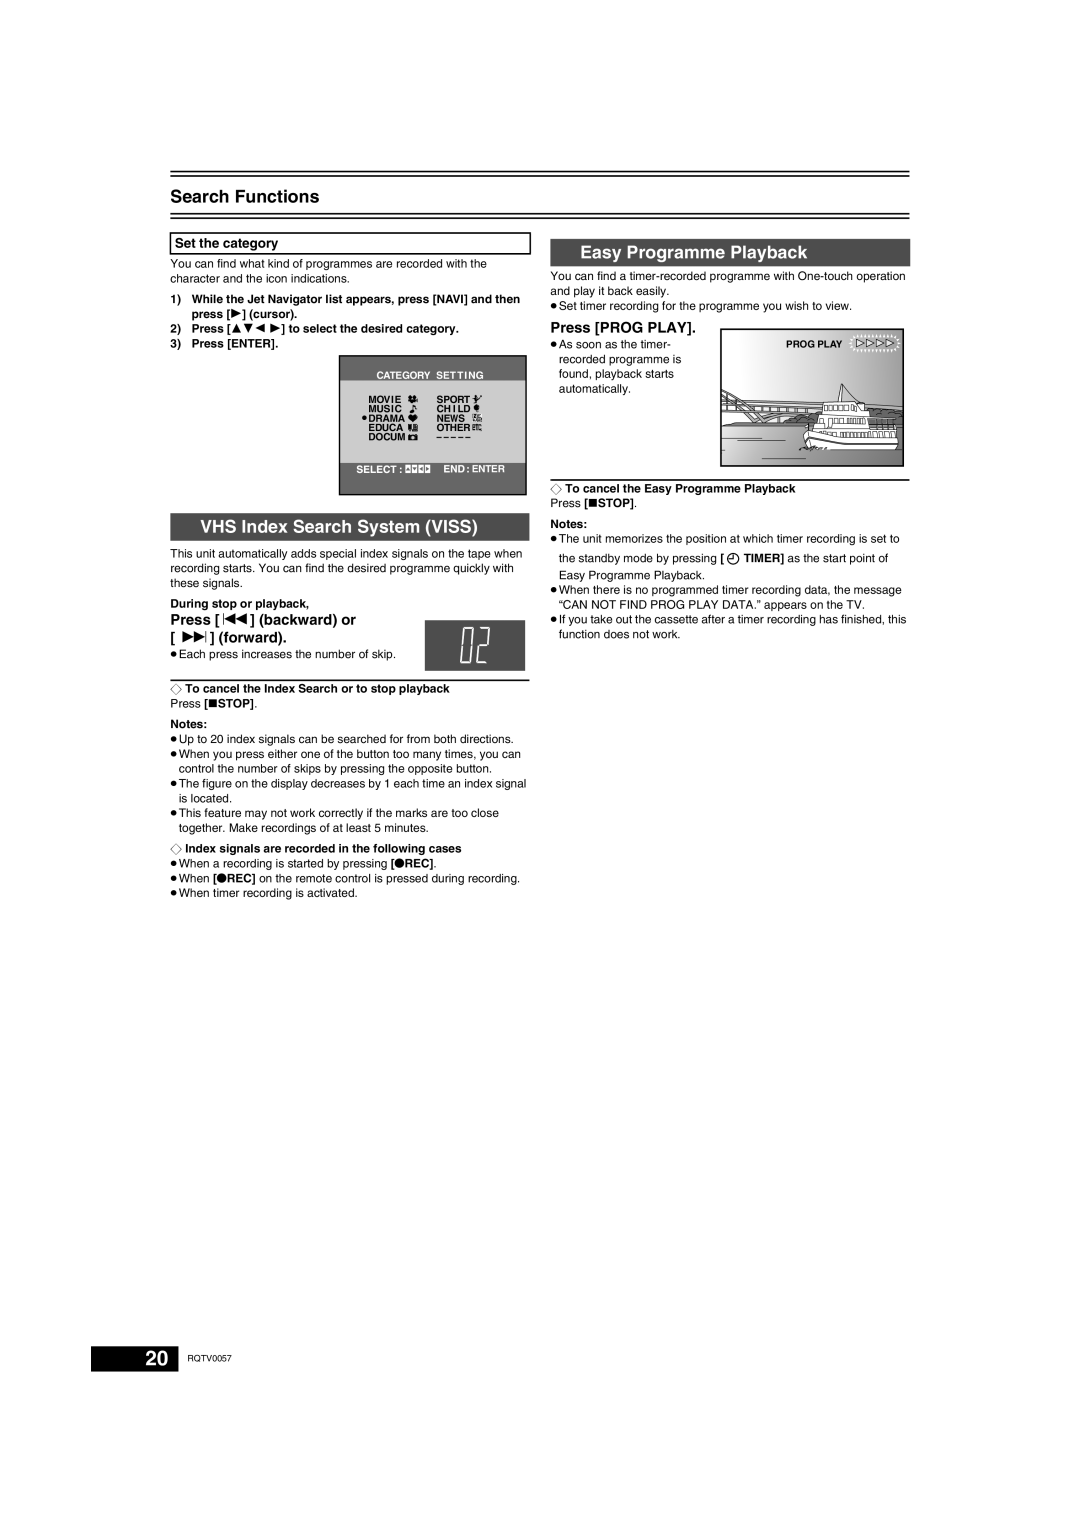 Panasonic NV-VP33 Series Search Functions, Easy Programme Playback, VHS Index Search System VISS, Press PROG PLAY 